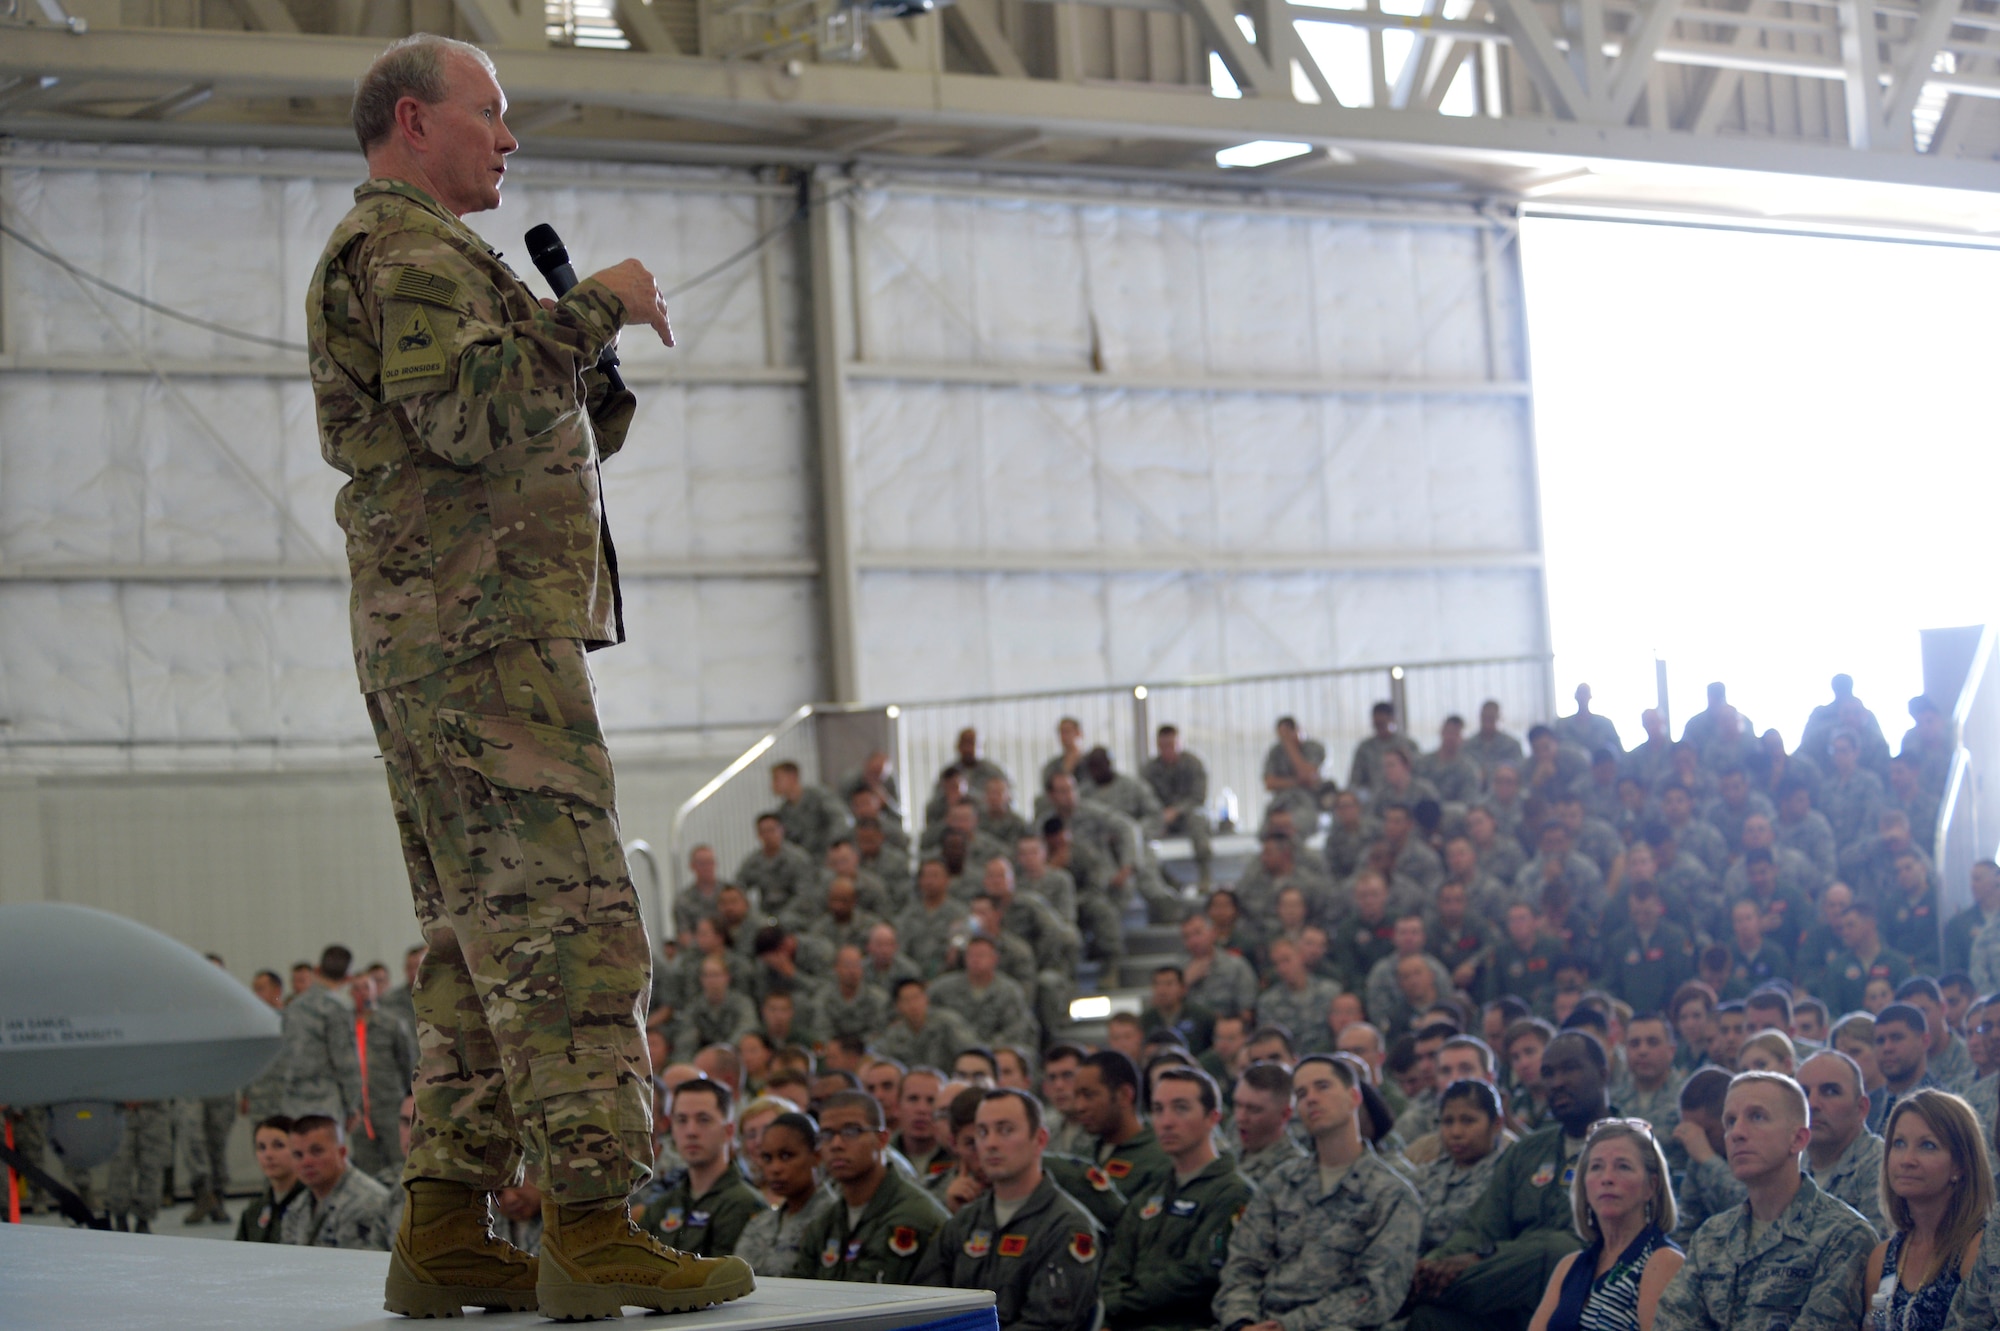 Army Gen. Martin E. Dempsey, Chairman of the Joint Chiefs of Staff speaks during an all-call on Aug. 12, 2015, at Creech Air Force Base, Nevada. This visit was the last domestic visit before Dempsey tours the overseas bases. (U.S. Air Force photo by Airman 1st Class Christian Clausen/Released)